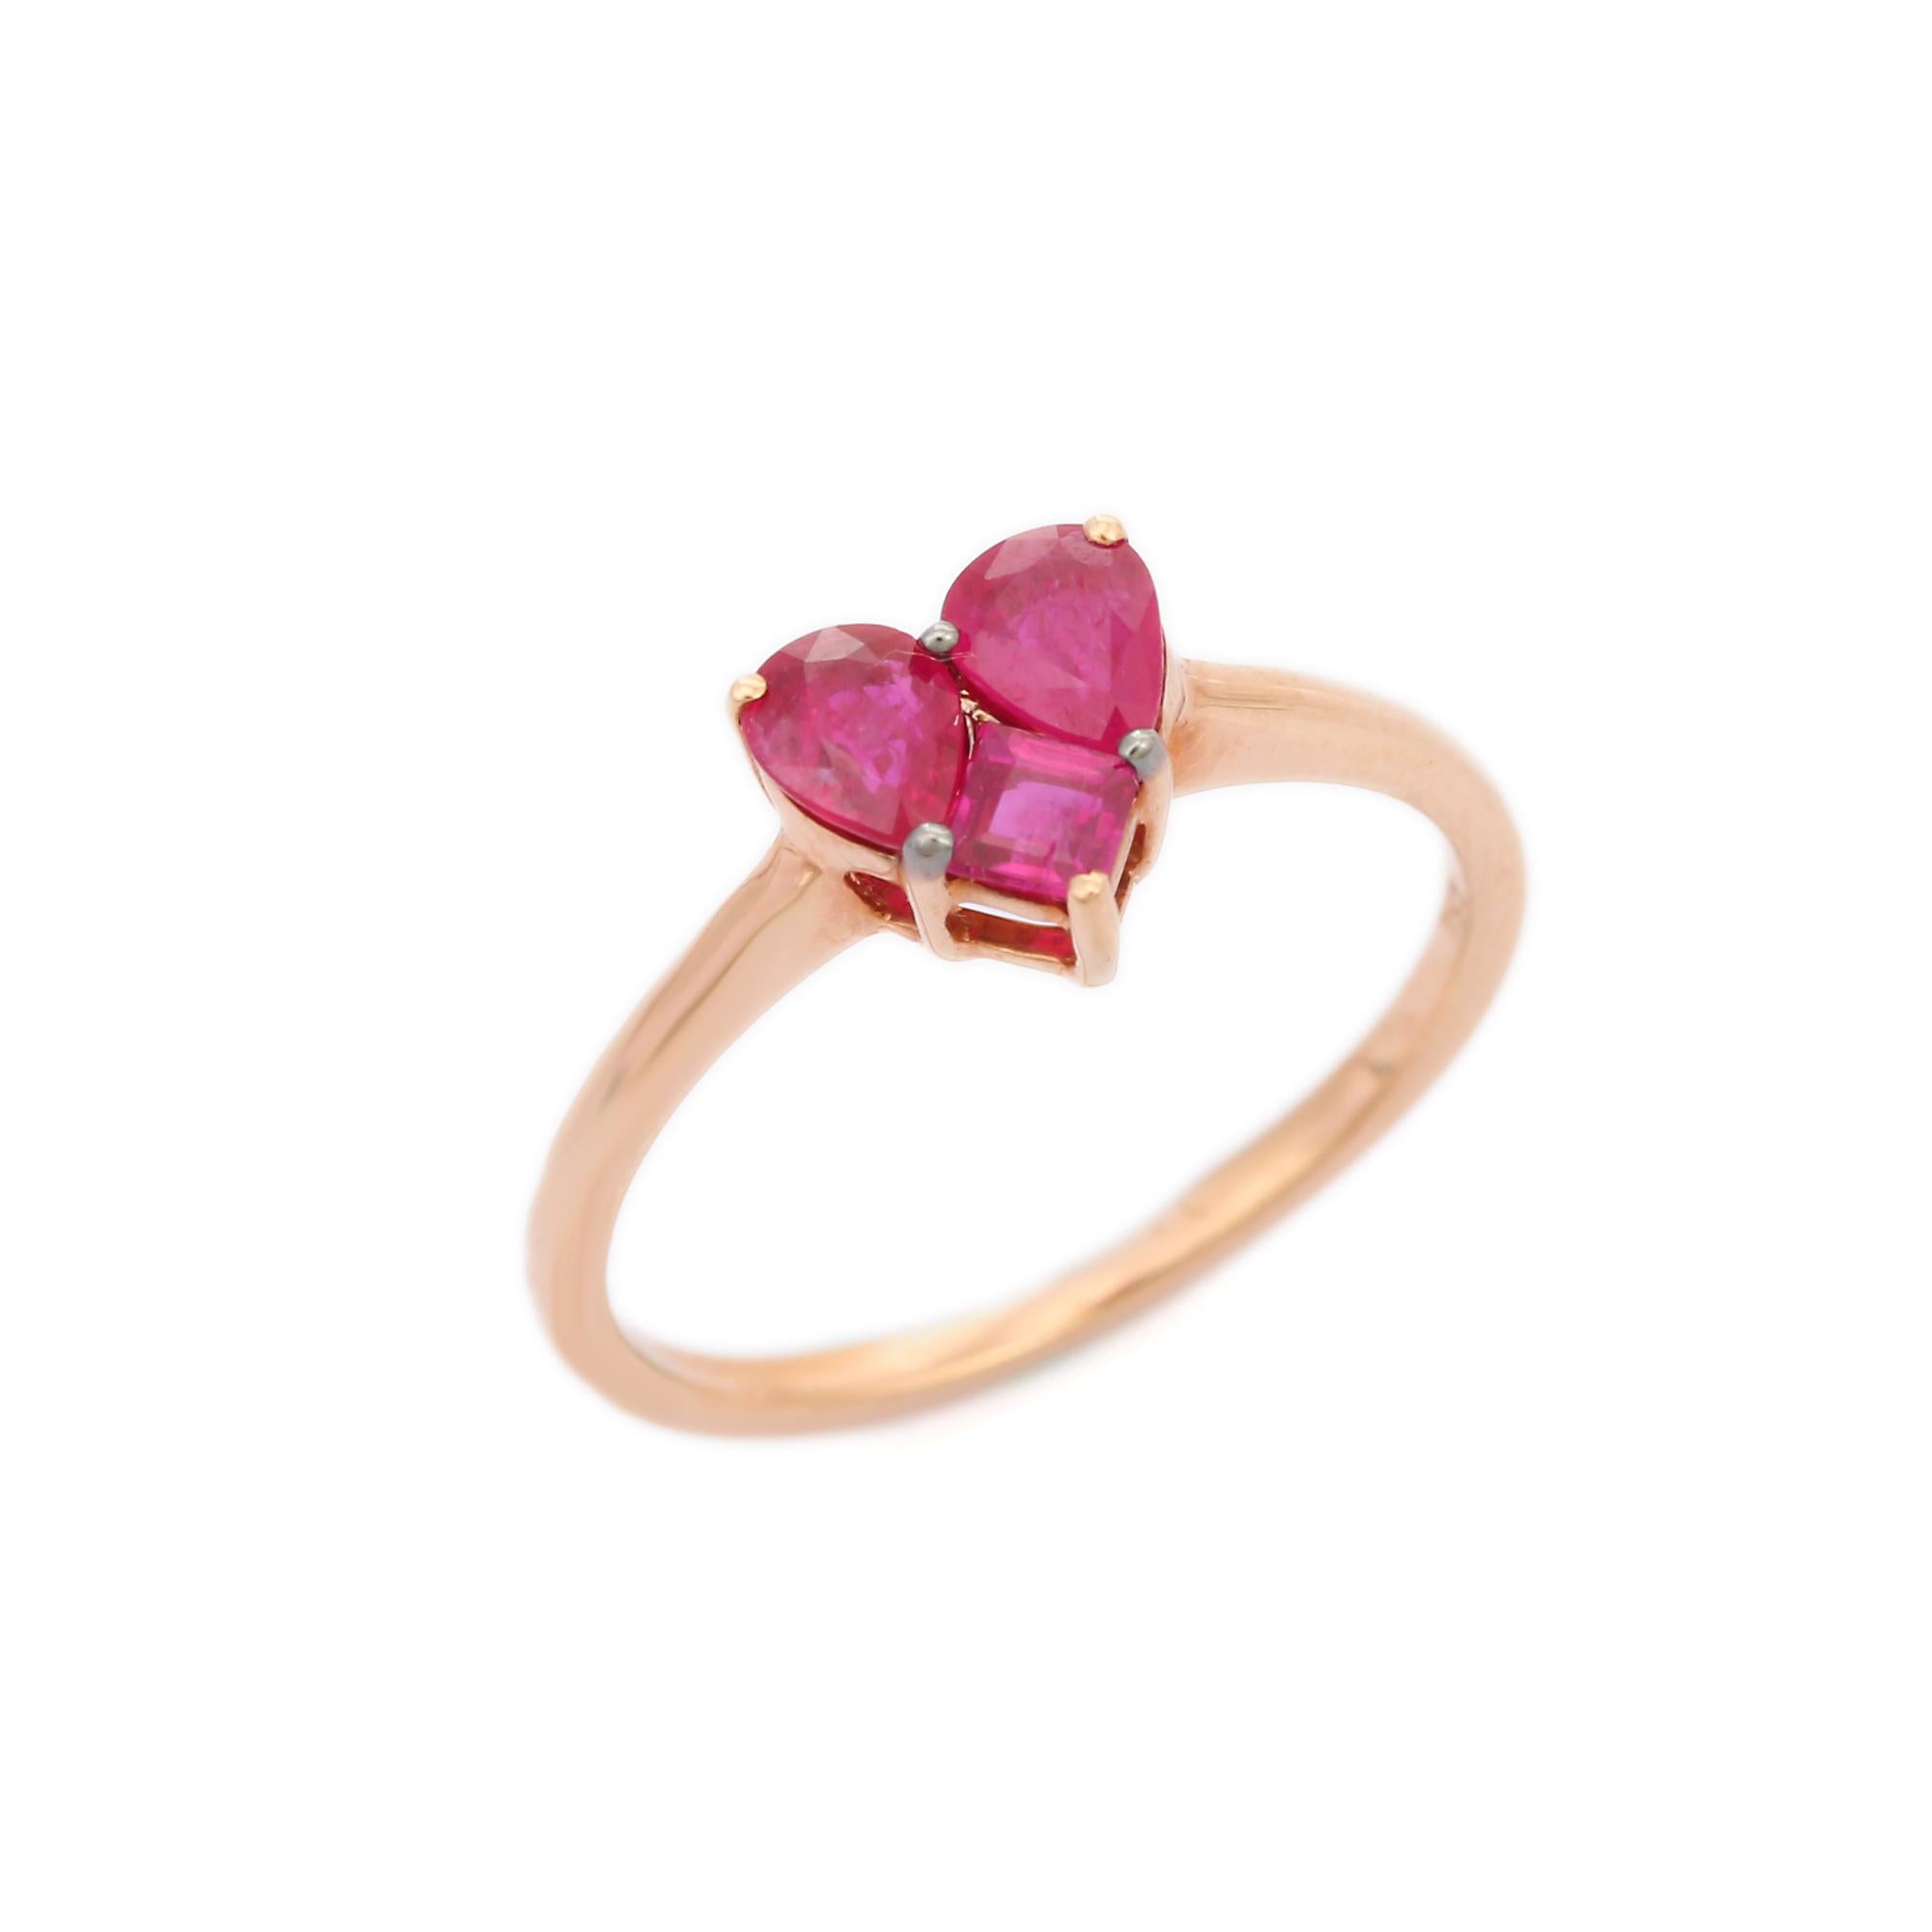 For Sale:  Dainty Ruby Heart Promise Ring Made in 18k Solid Rose Gold 7